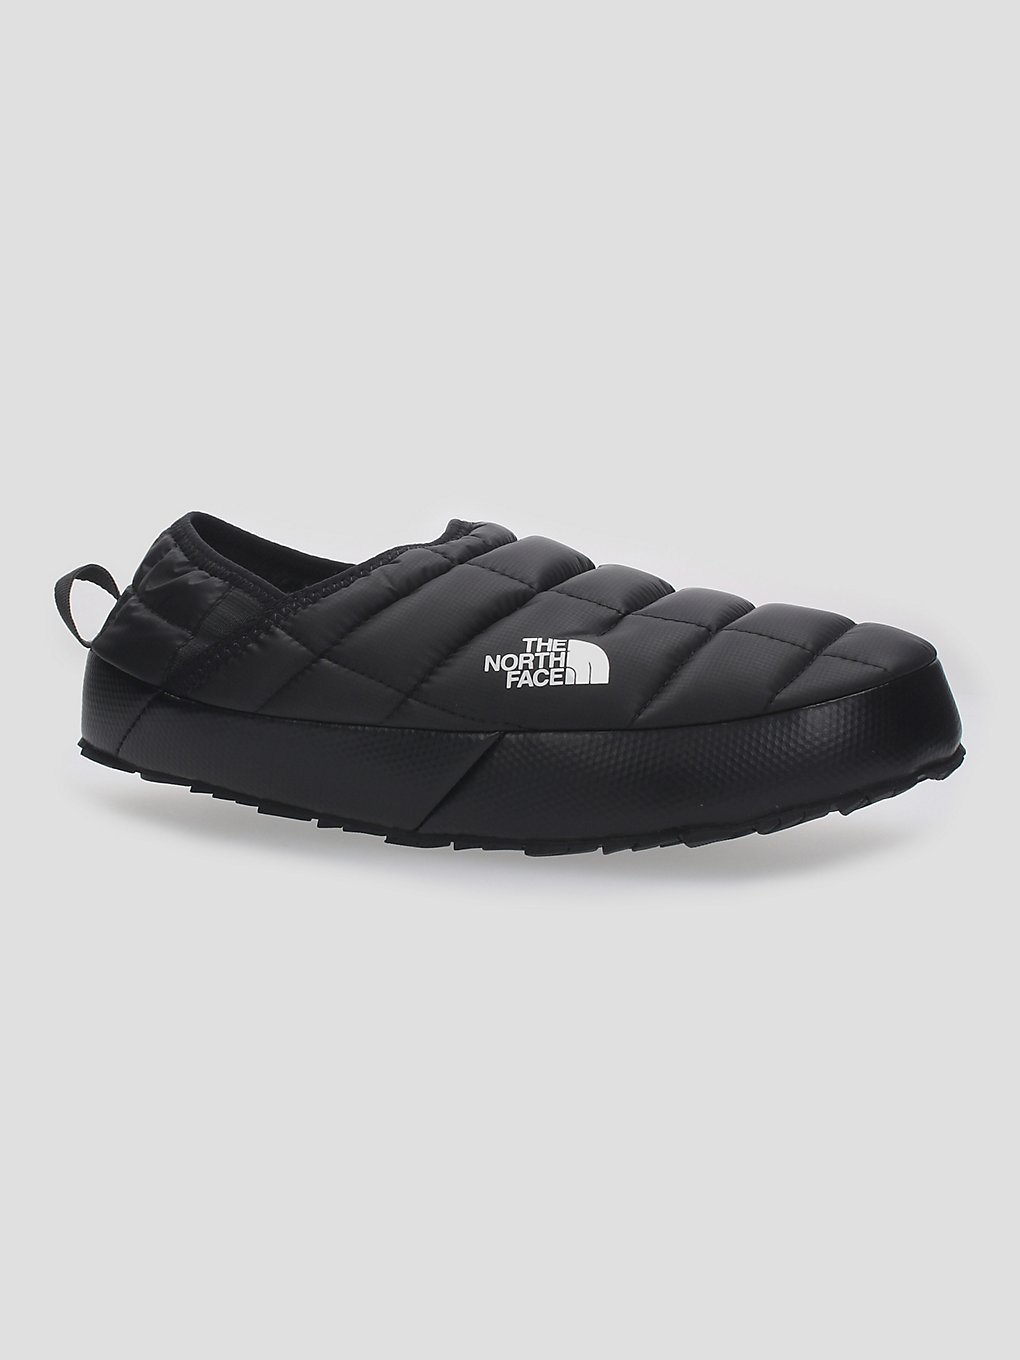 THE NORTH FACE Thermoball Traction Mule V Chaussres après-ski noir